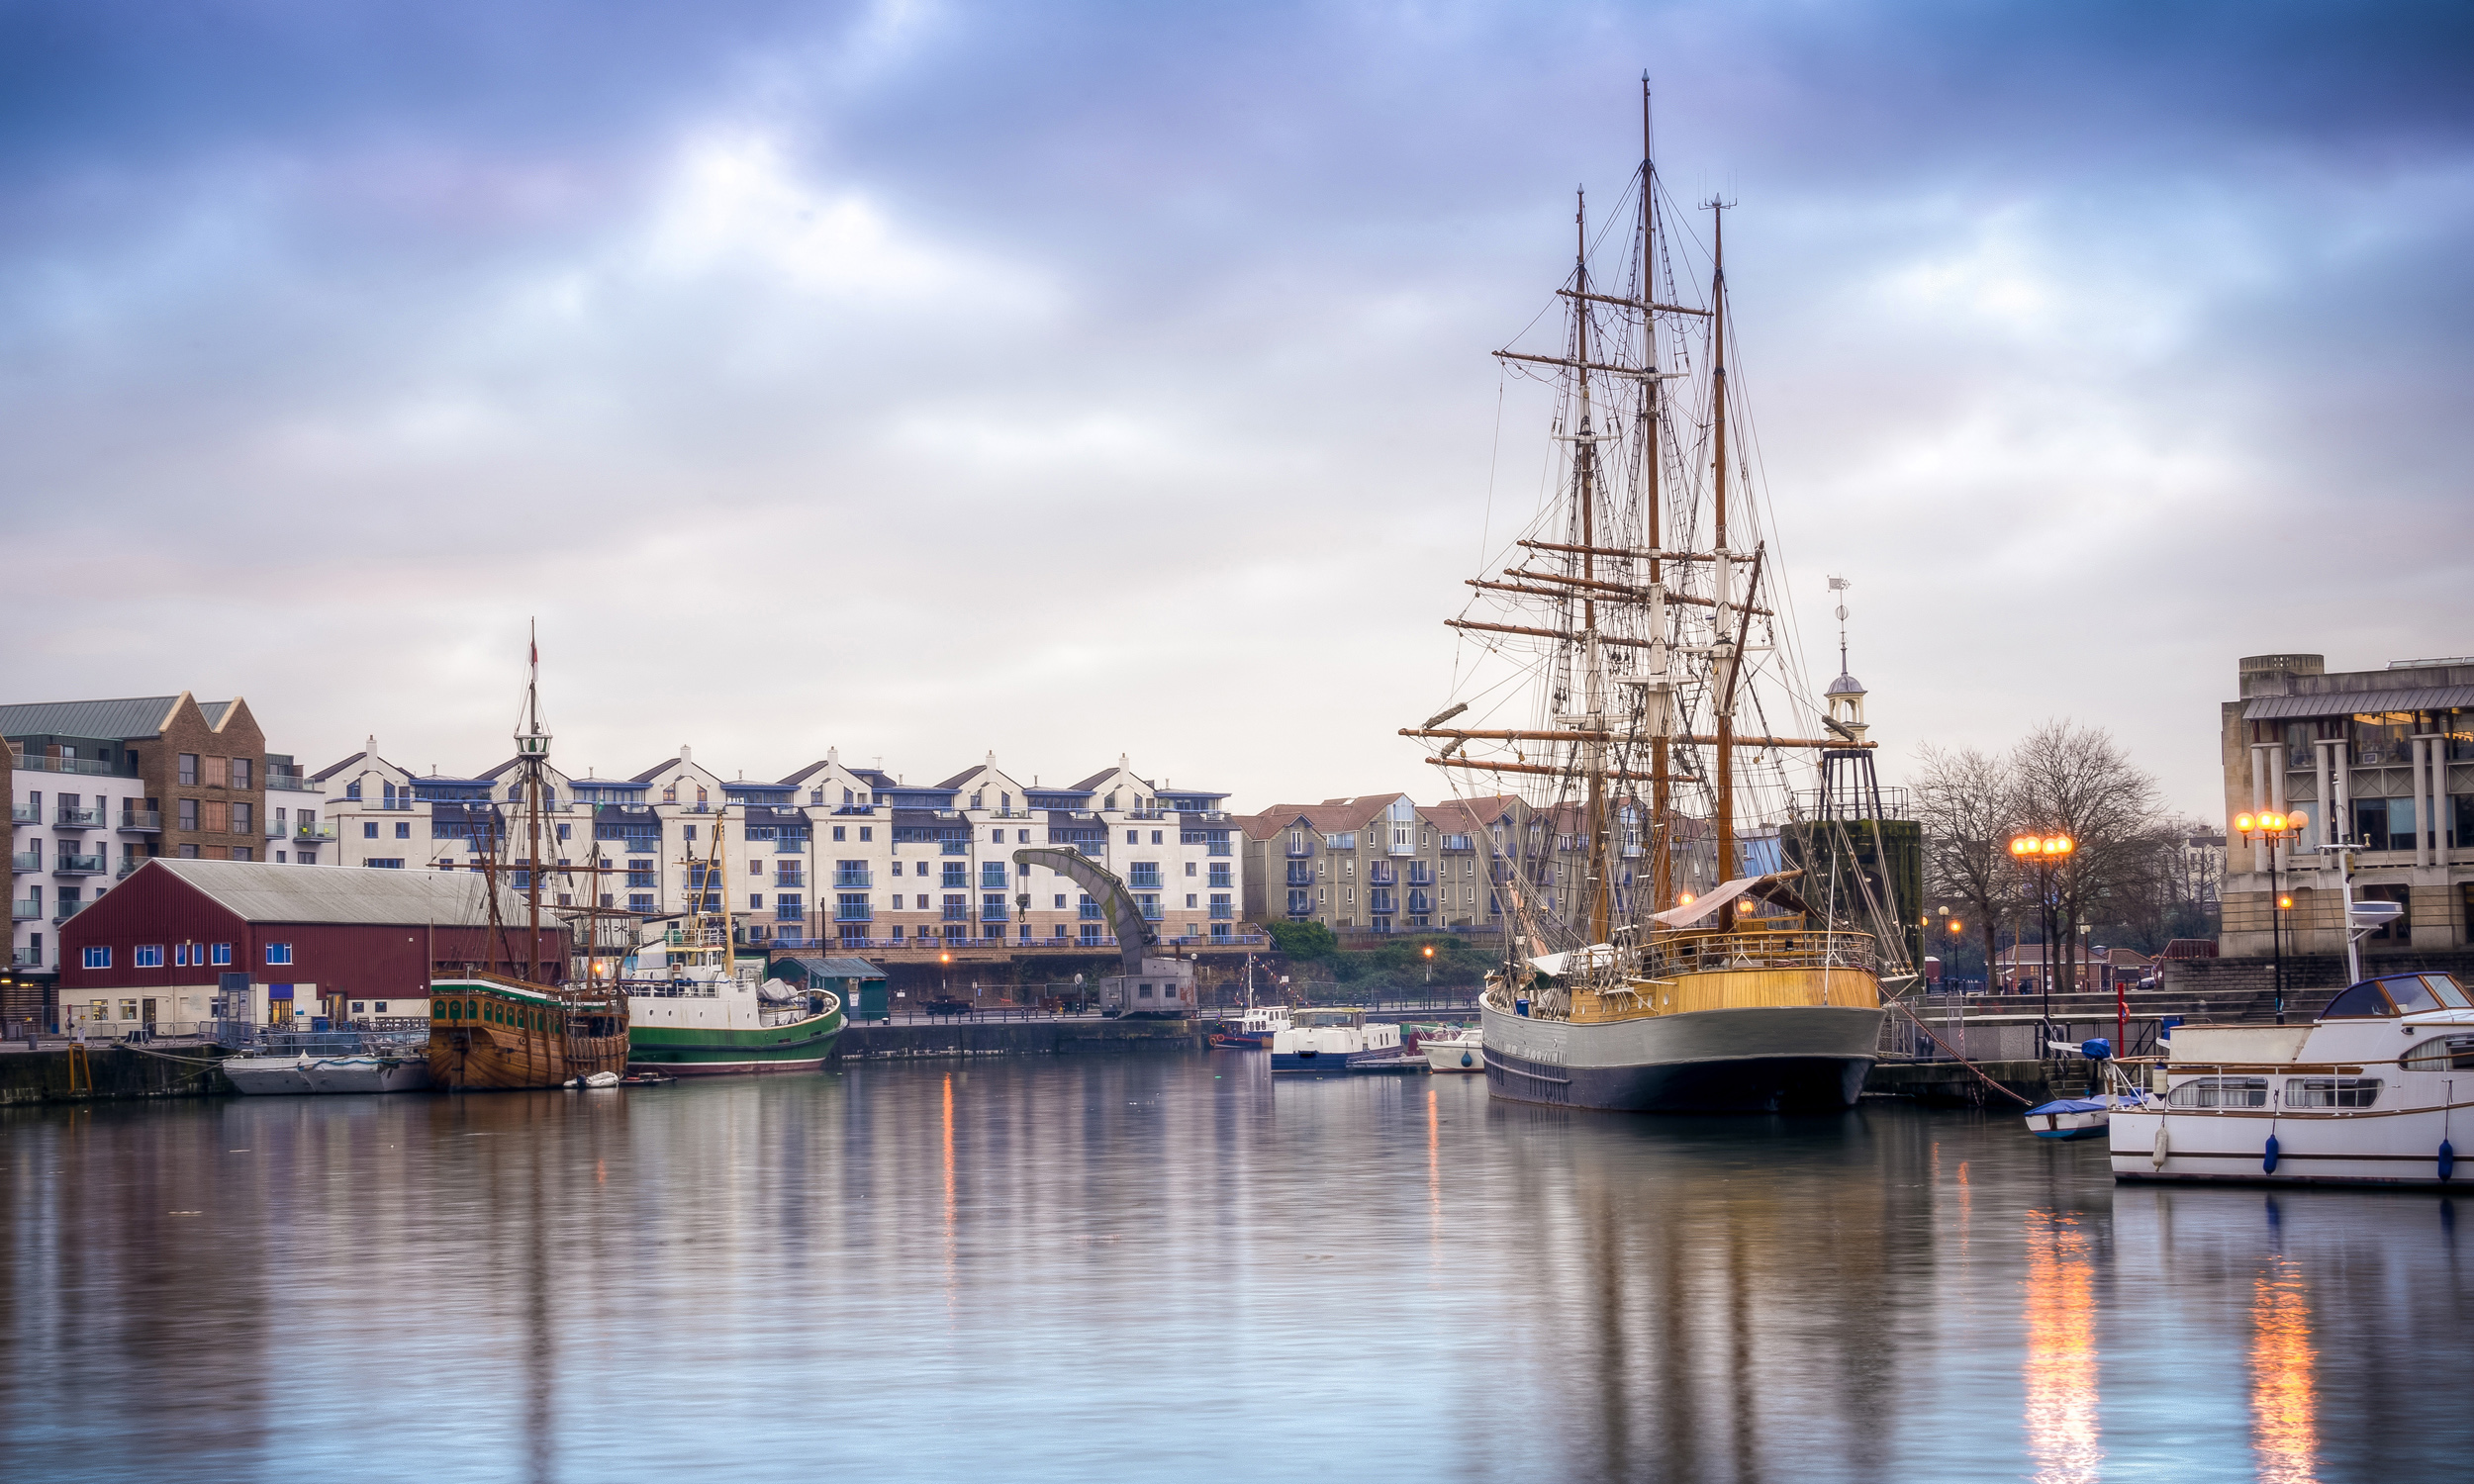 Bristol's renowned harbourside is only 10 minutes away